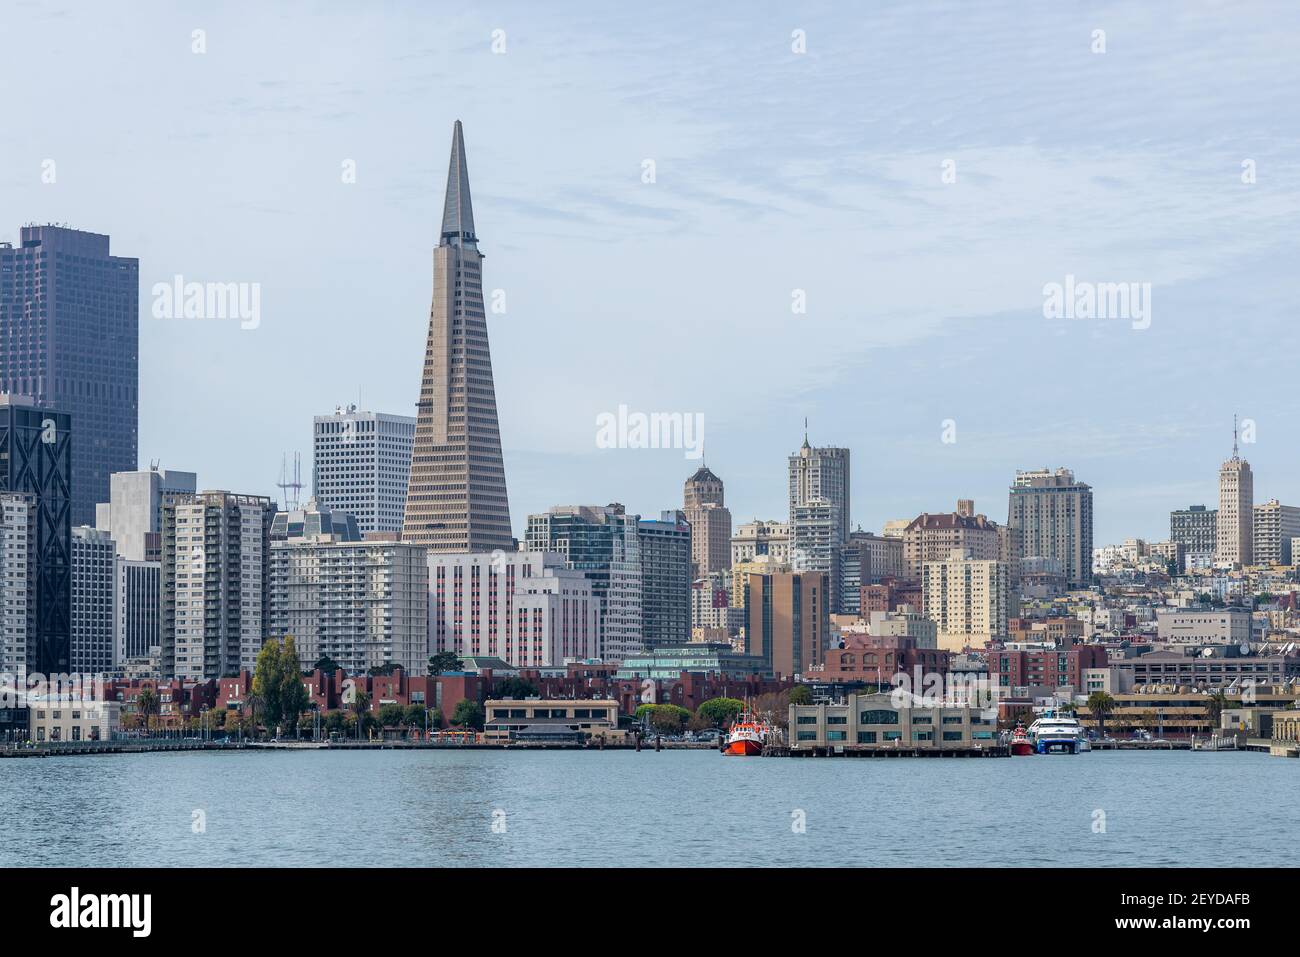 SAN FRANCISCO, USA - February 12, 2018: TransAmerica Pyramid San Francisco and Buildings in Downtown famous post card vintage colors - Image Stock Photo